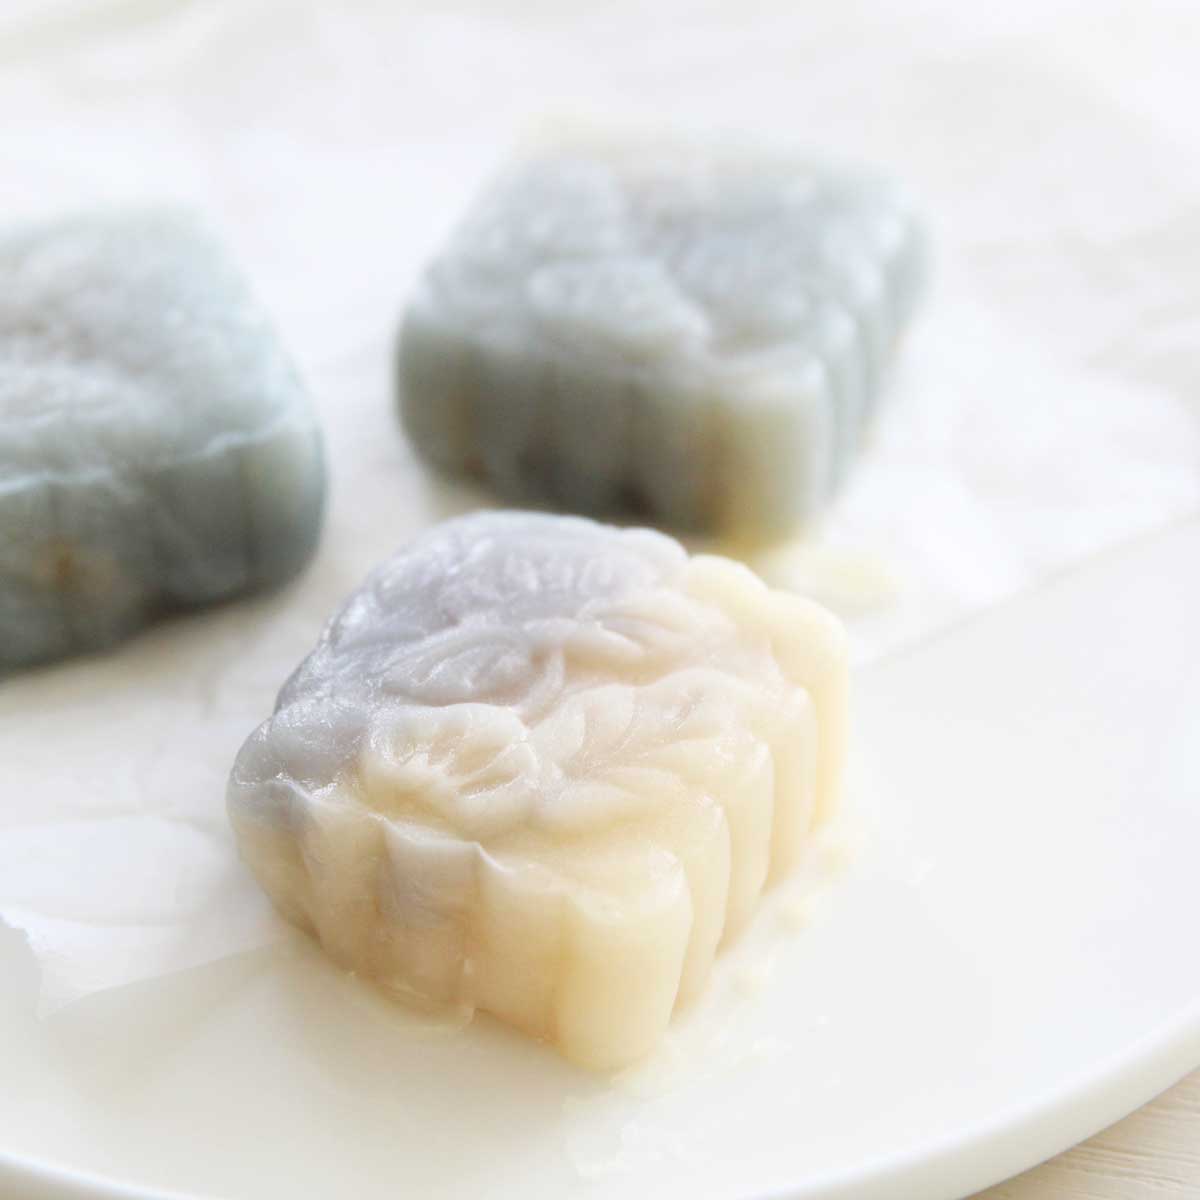 10 Minute Butterfly Pea Snowskin Mooncakes (No Steaming Required!) - Lemon Snow Skin Mooncakes